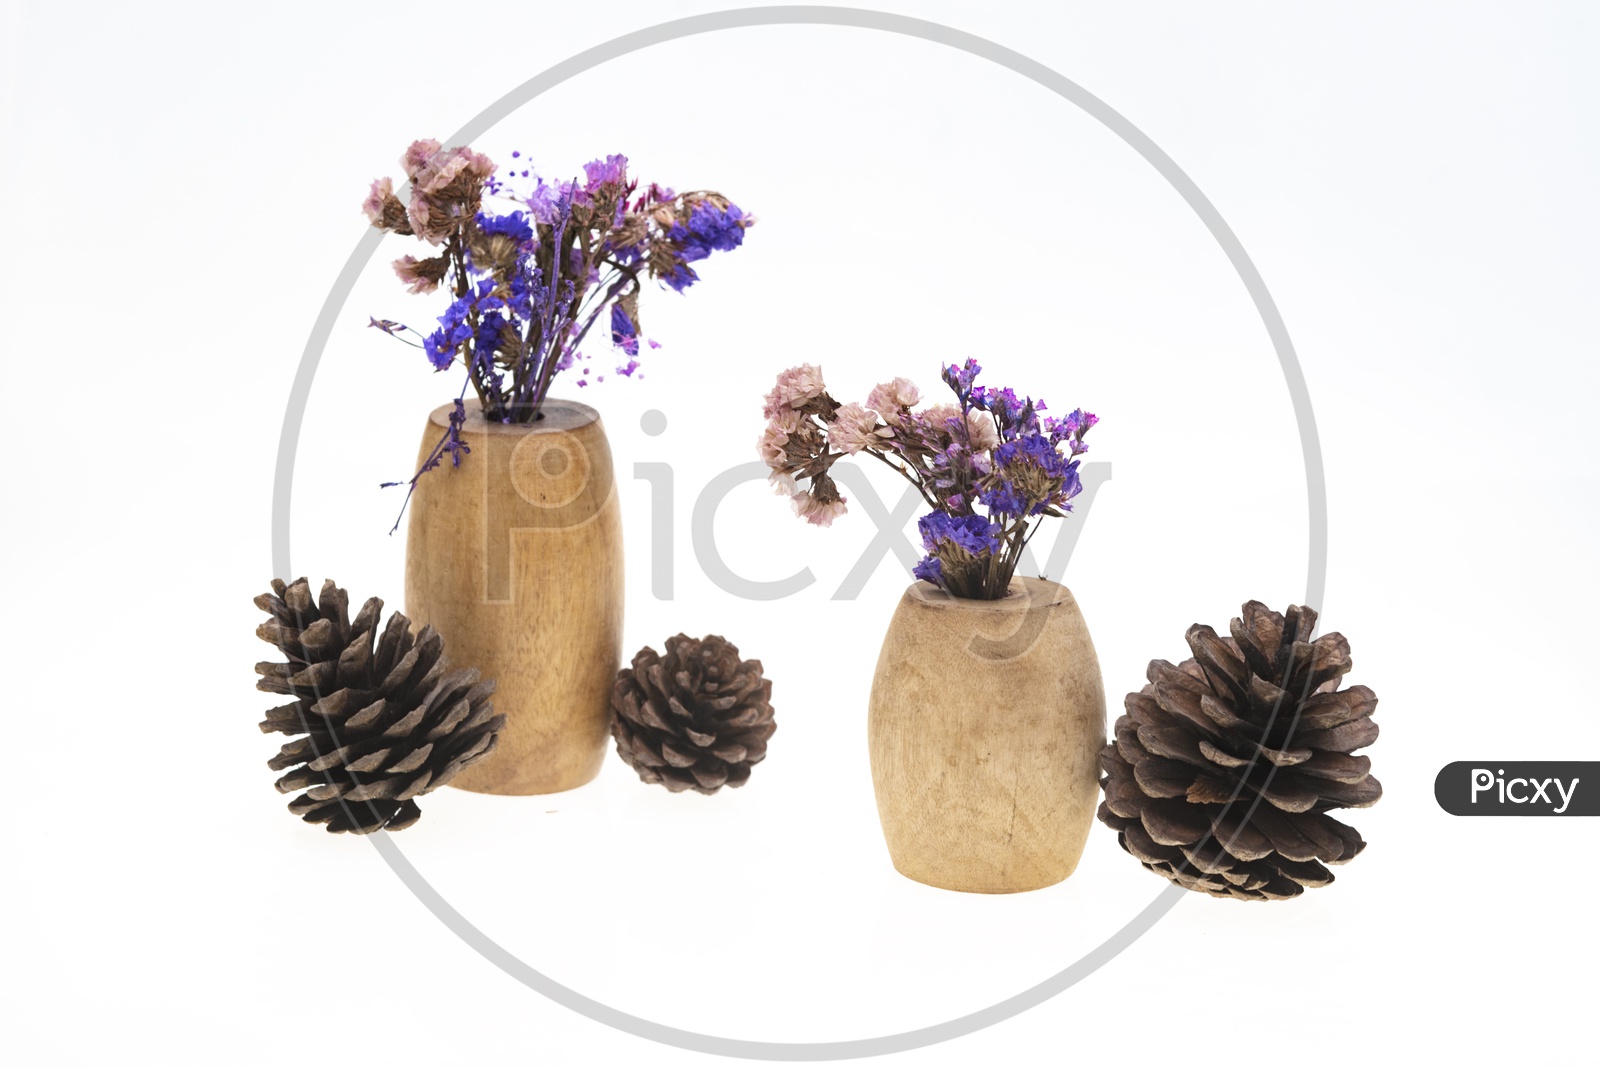 Dried vintage flowers in wooden vases and pine cones on white ground.